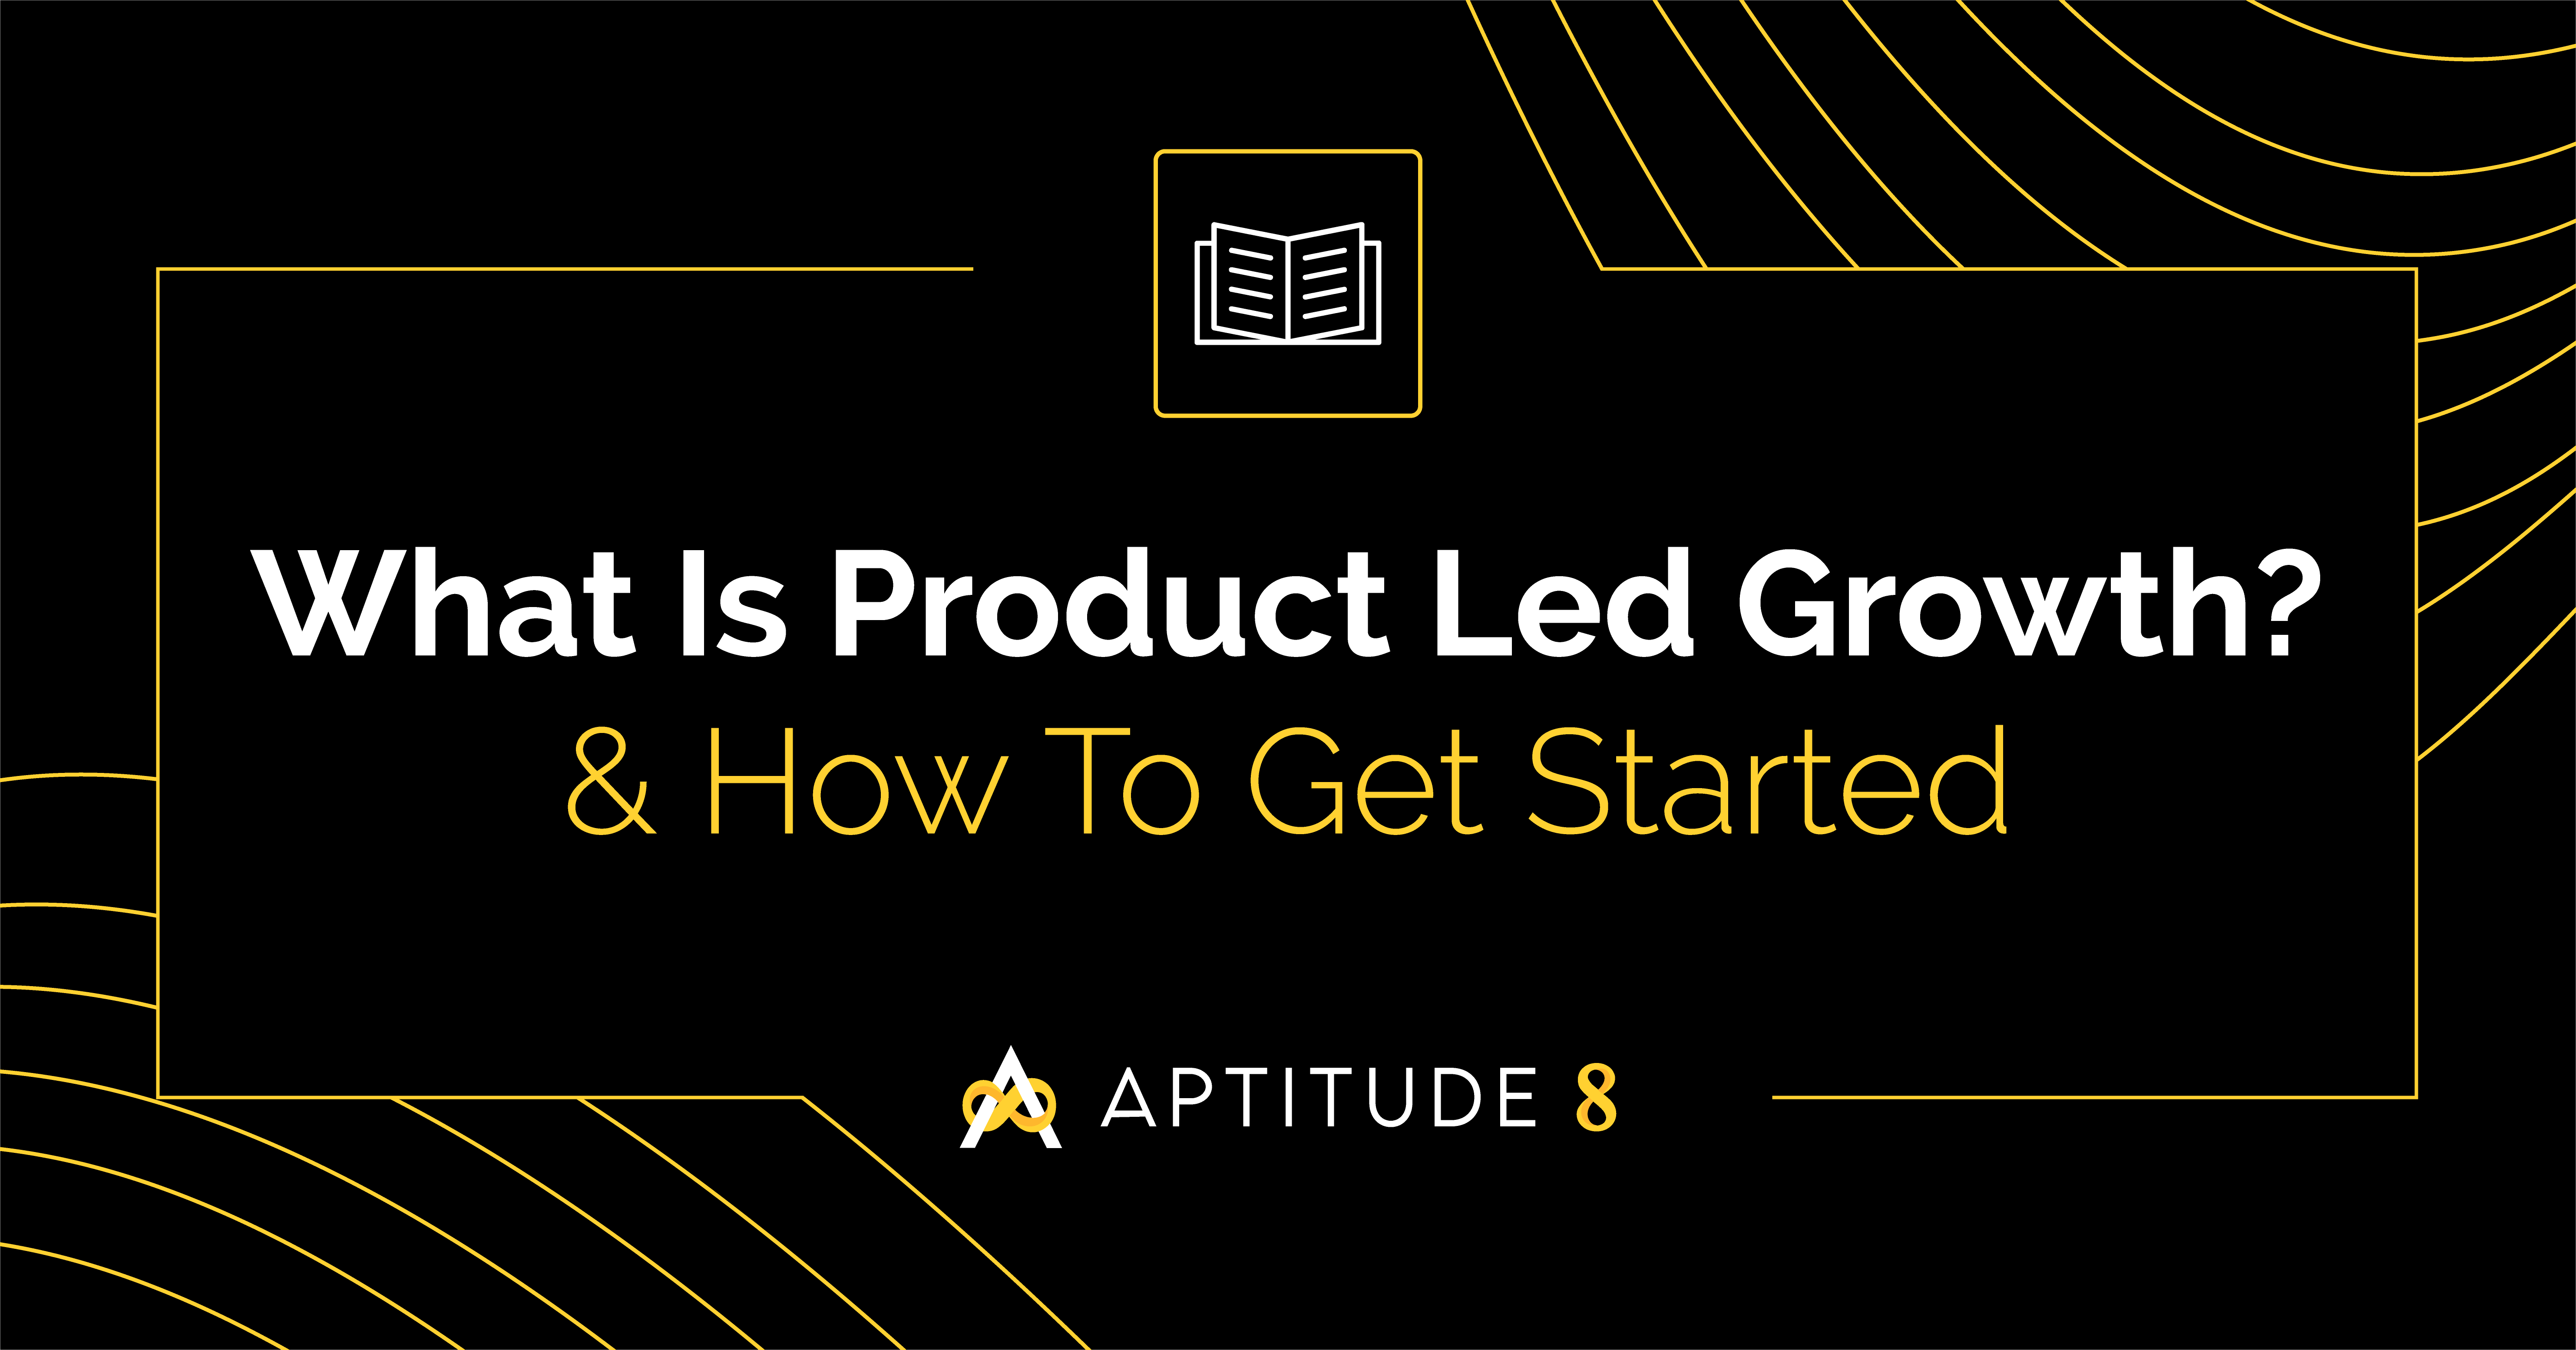 What Is Product Led Growth?